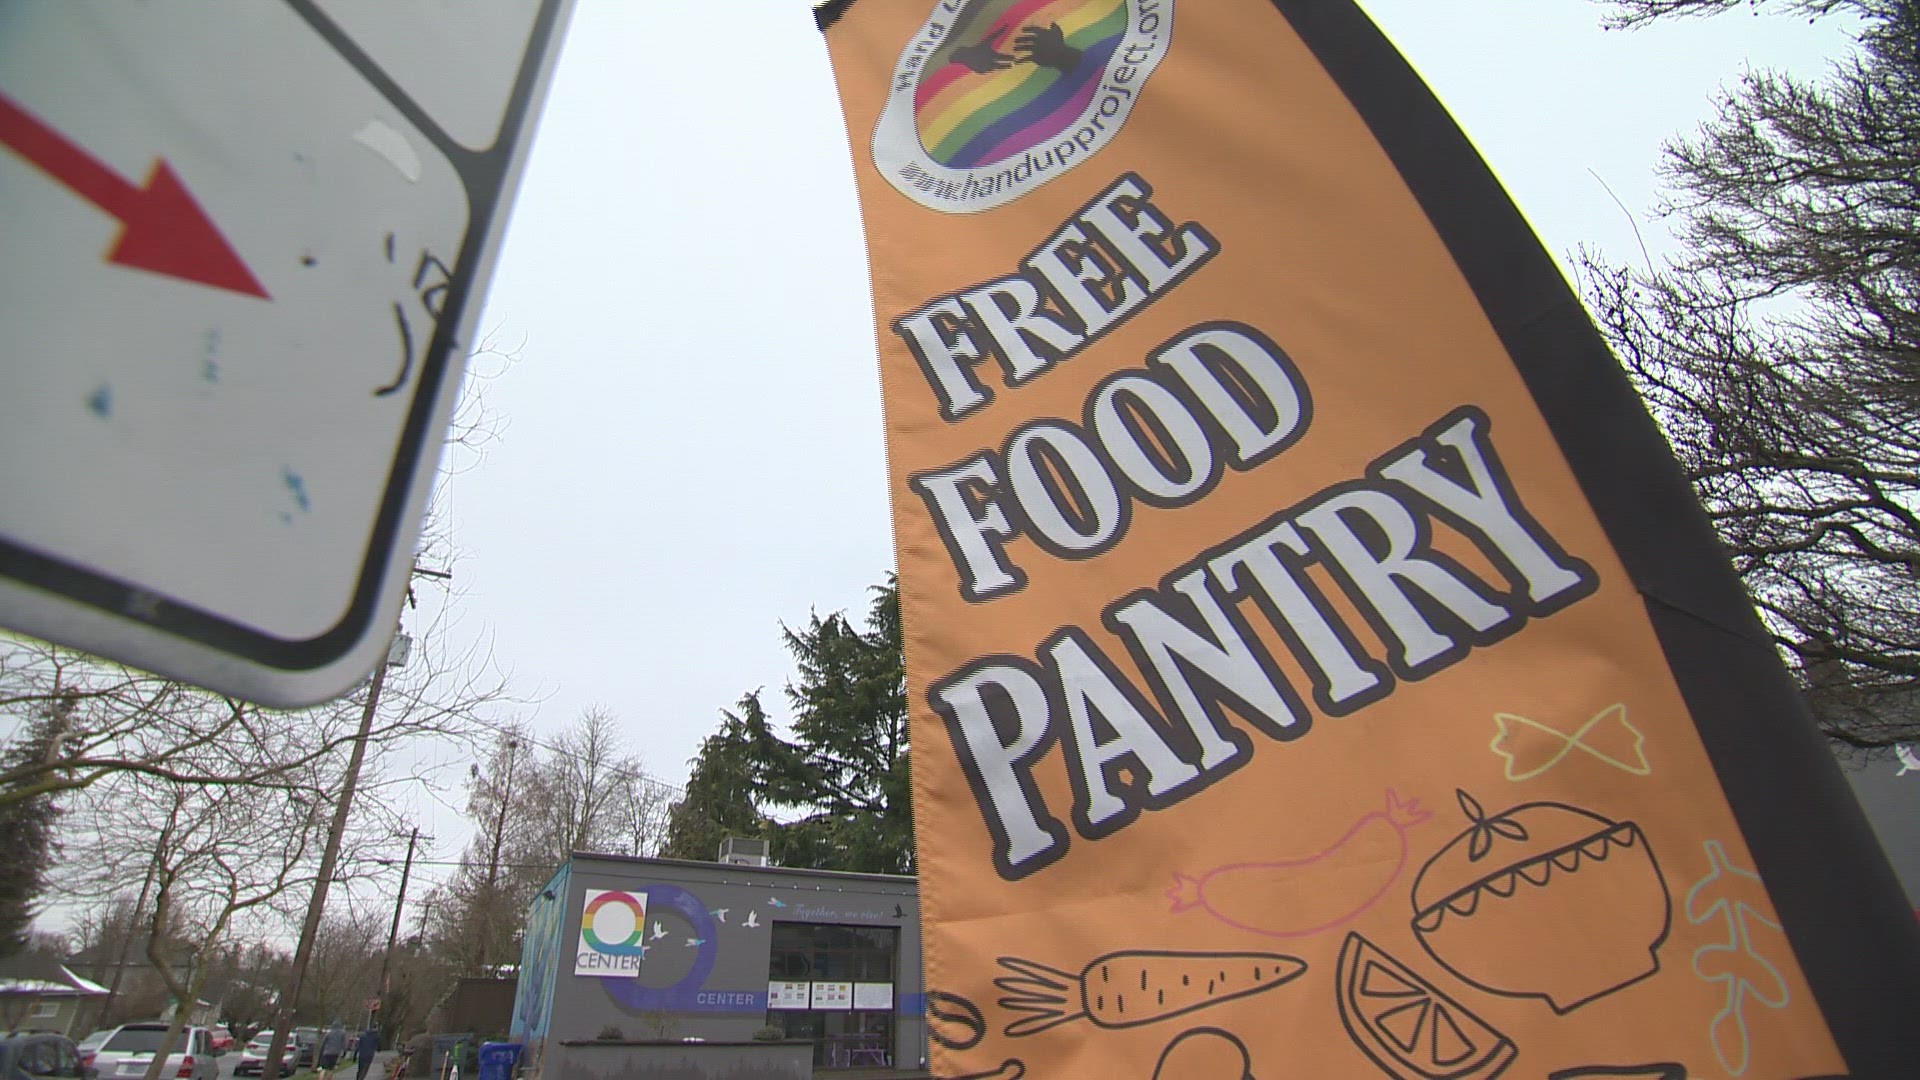 The Hand Up Project knows that going to a food pantry operated by a religious organization or church can be a challenge for some in the LGBTQ community.